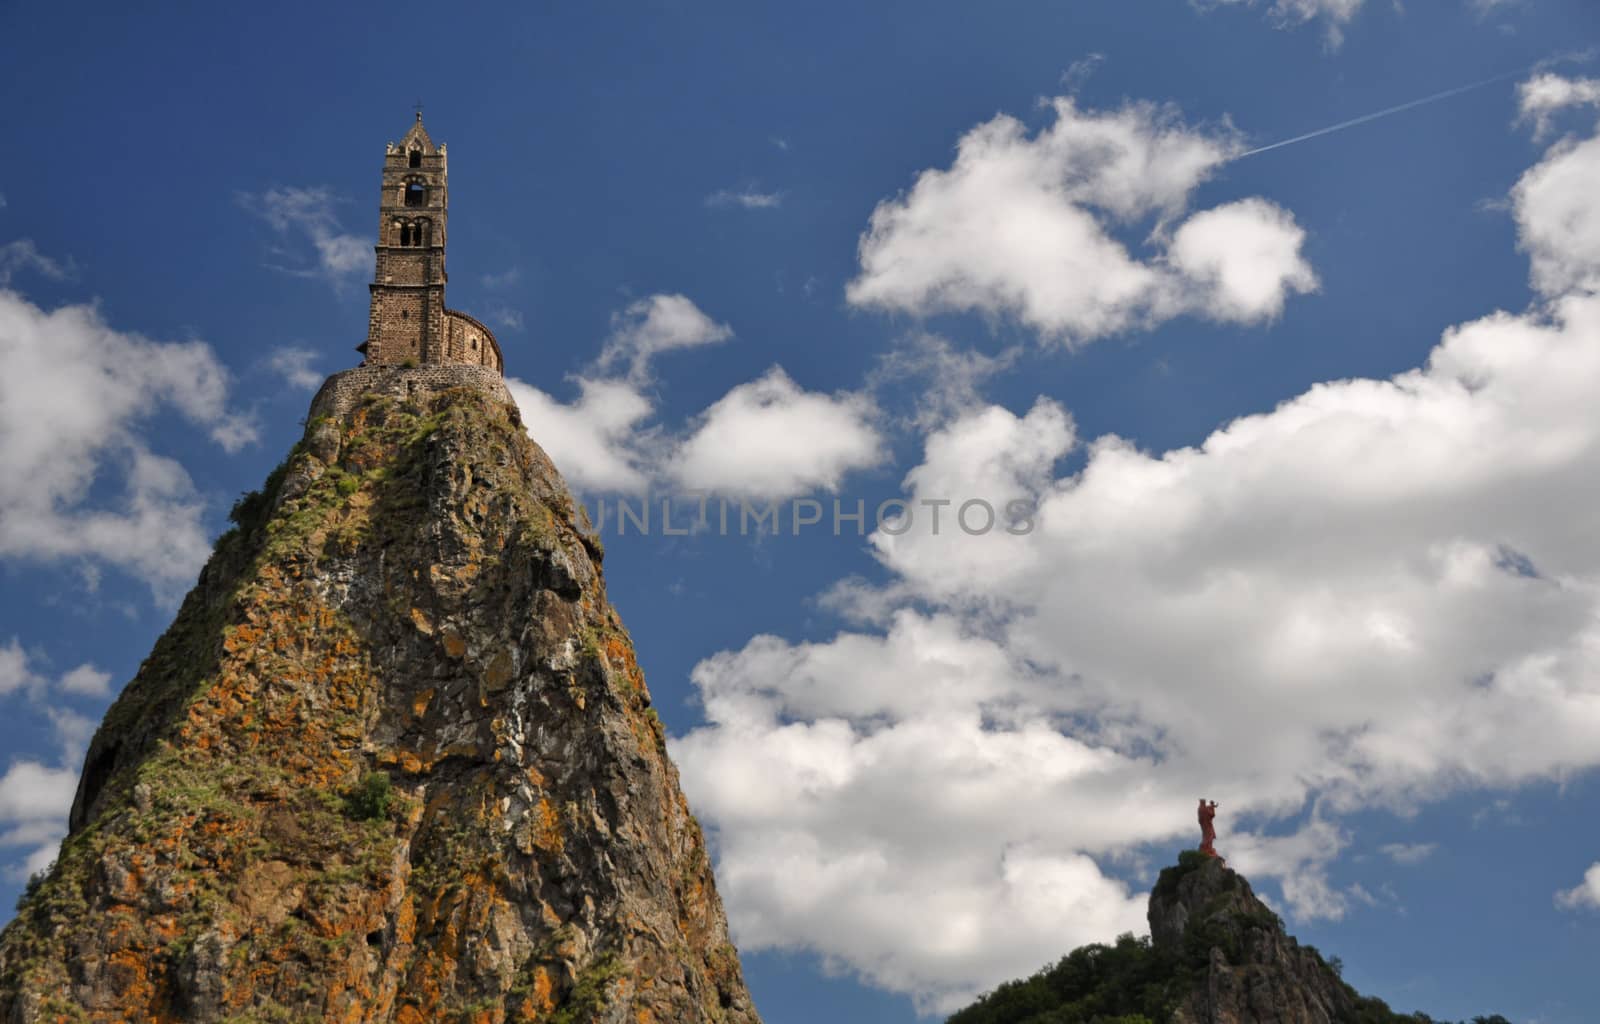 The Chapel built on the top of a needle of volcanic lava, called Rocher St Michel ( Mont d'Aiguilhe ) is one of the most impressive sights in the Auvergne, France